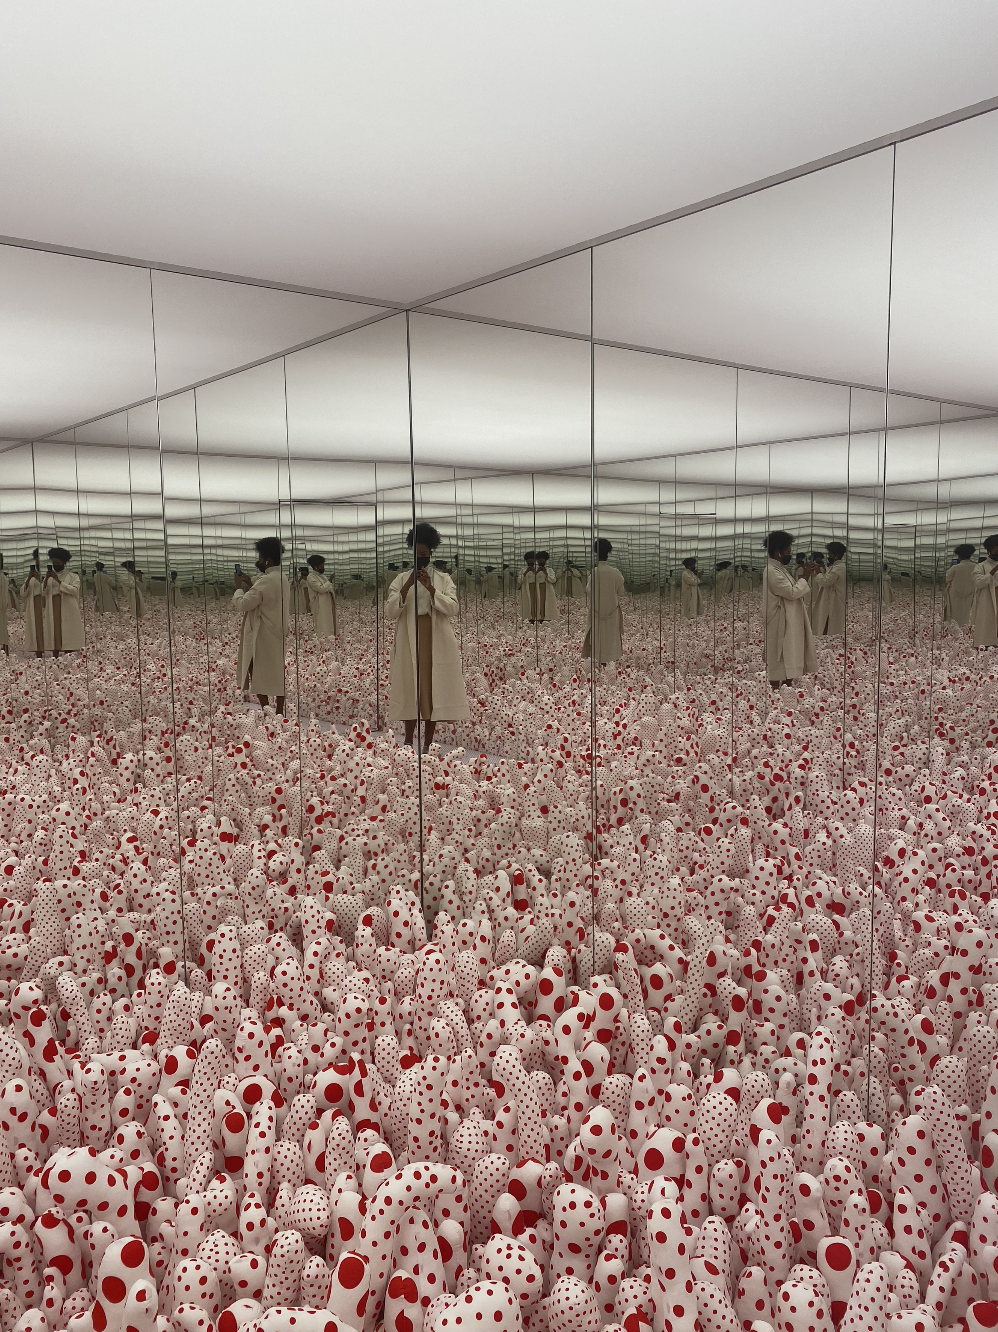 Paige Hopkins takes a picture in Kusama's mirror room, Phalli’s Field.